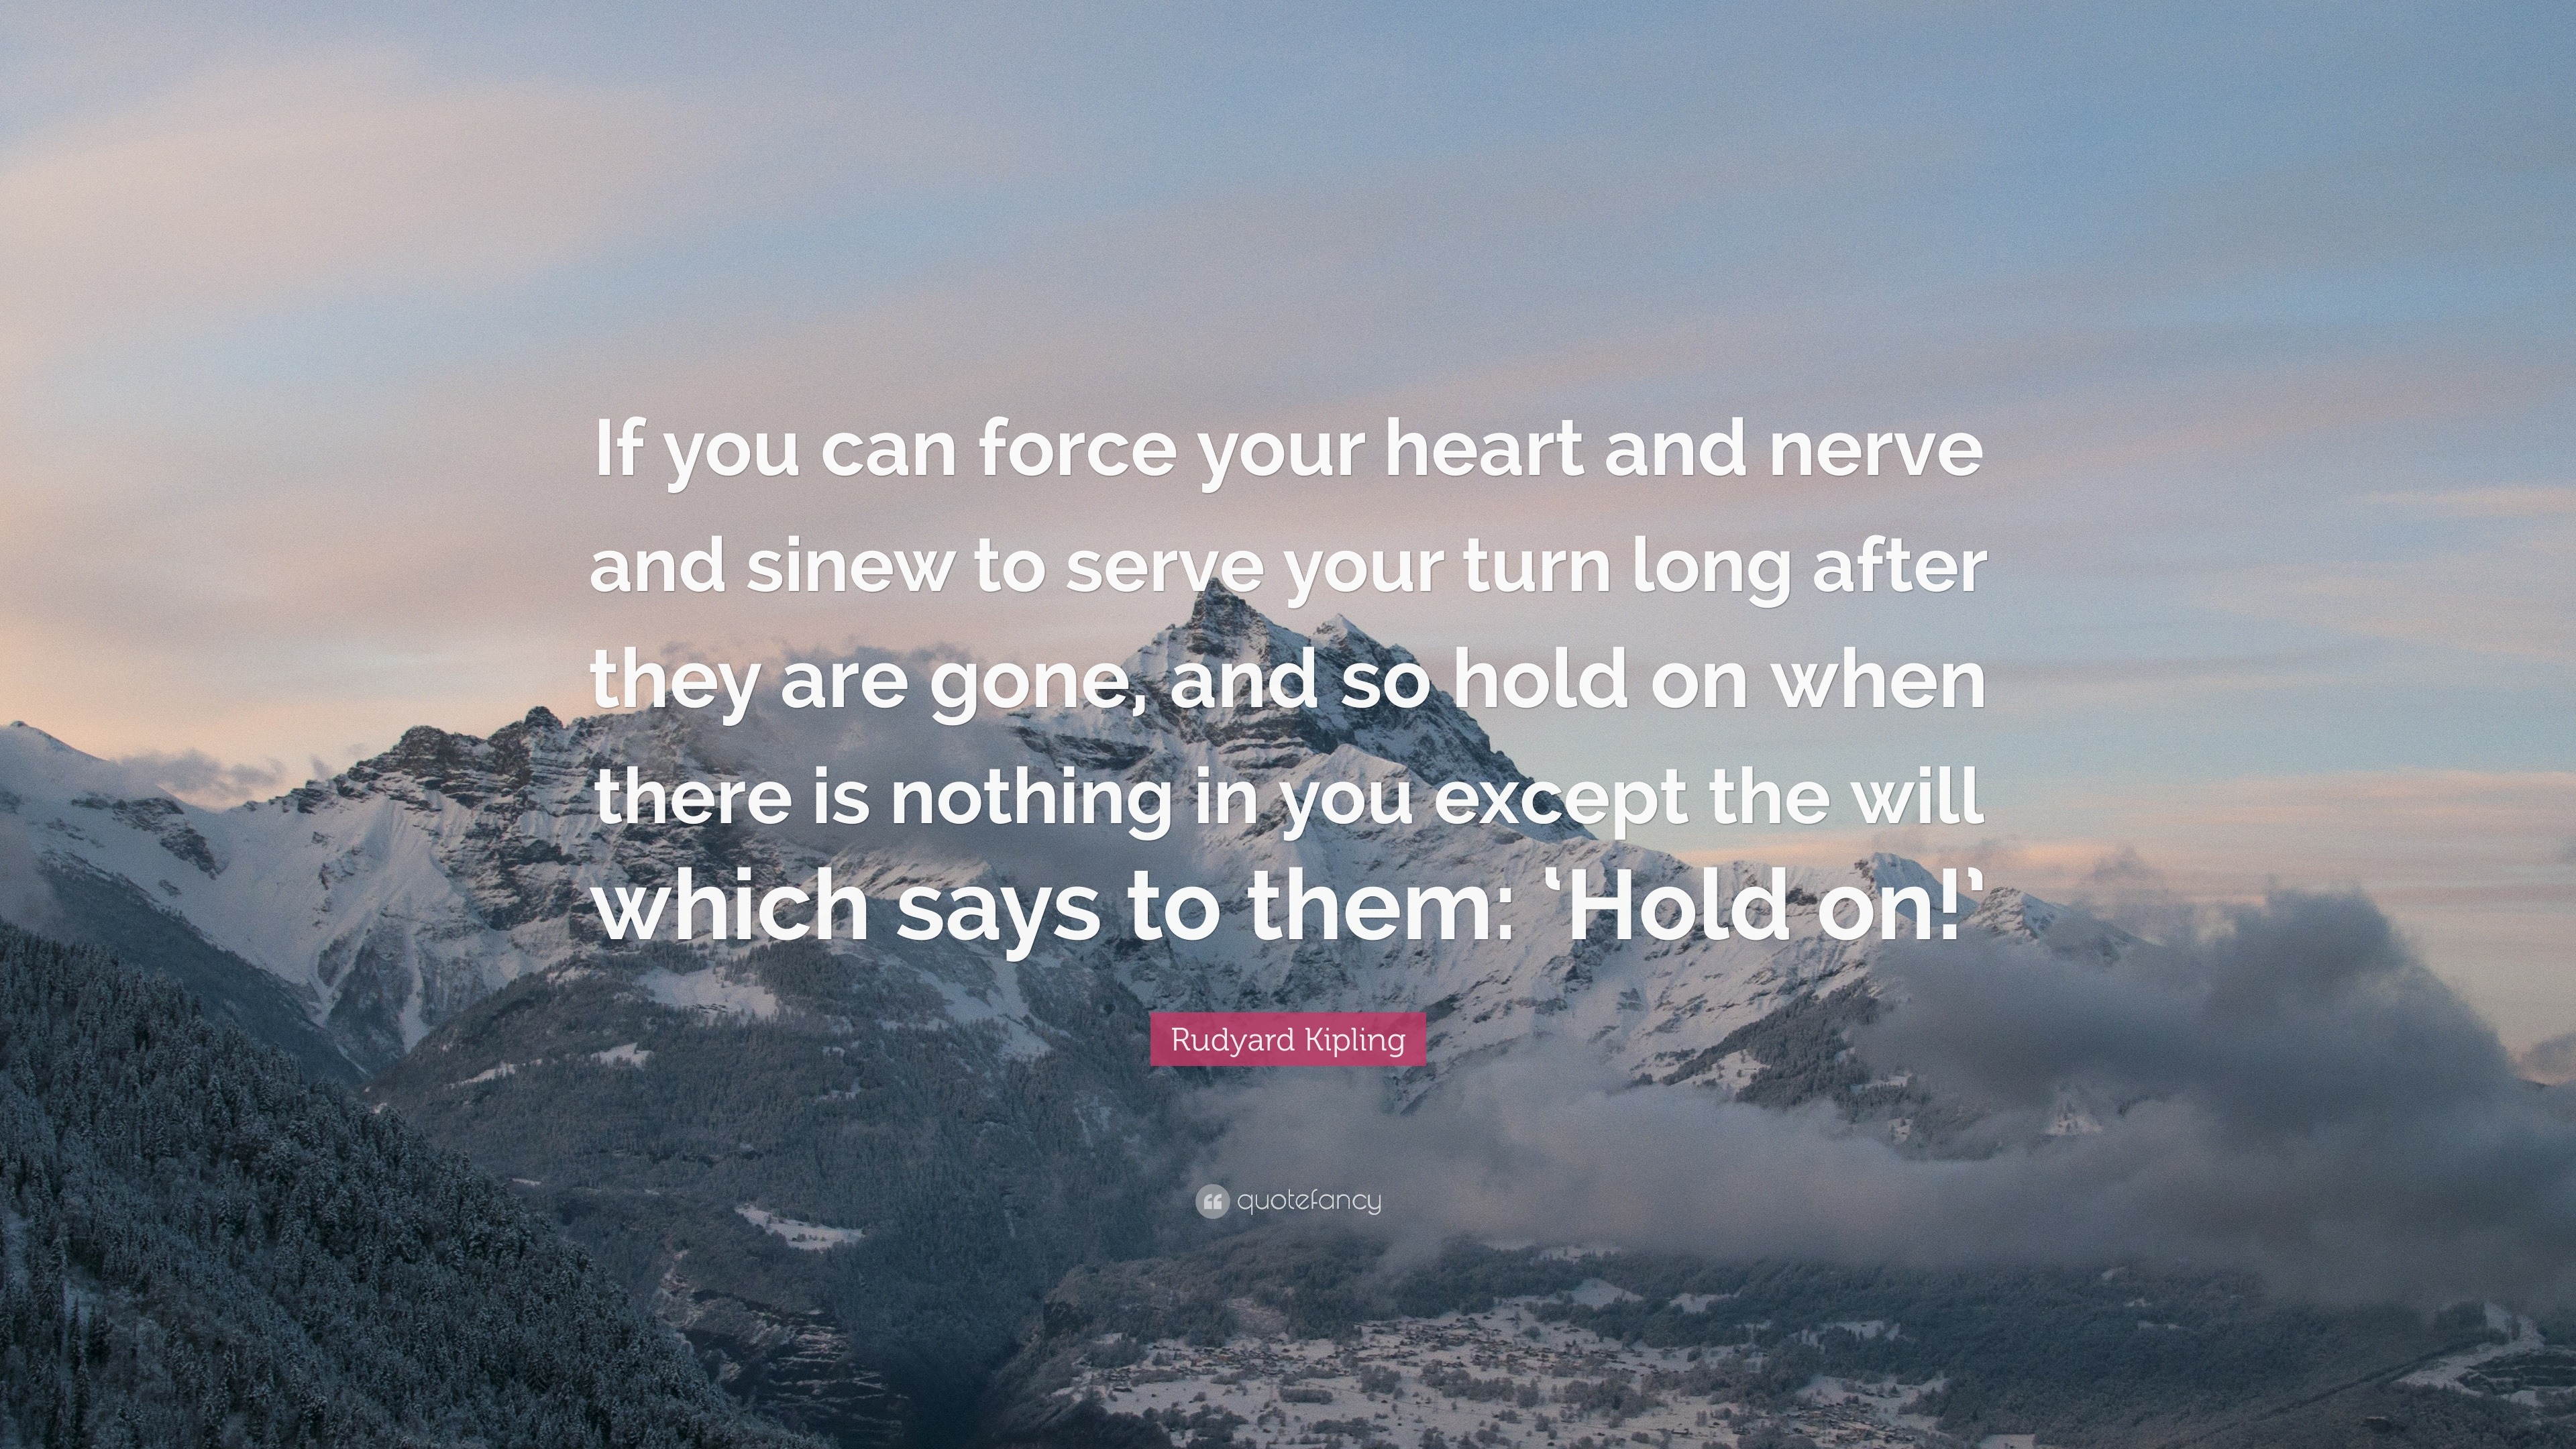 Rudyard Kipling Quote: “If you can force your heart and nerve and sinew to  serve your turn long after they are gone, and so hold on when there i...”